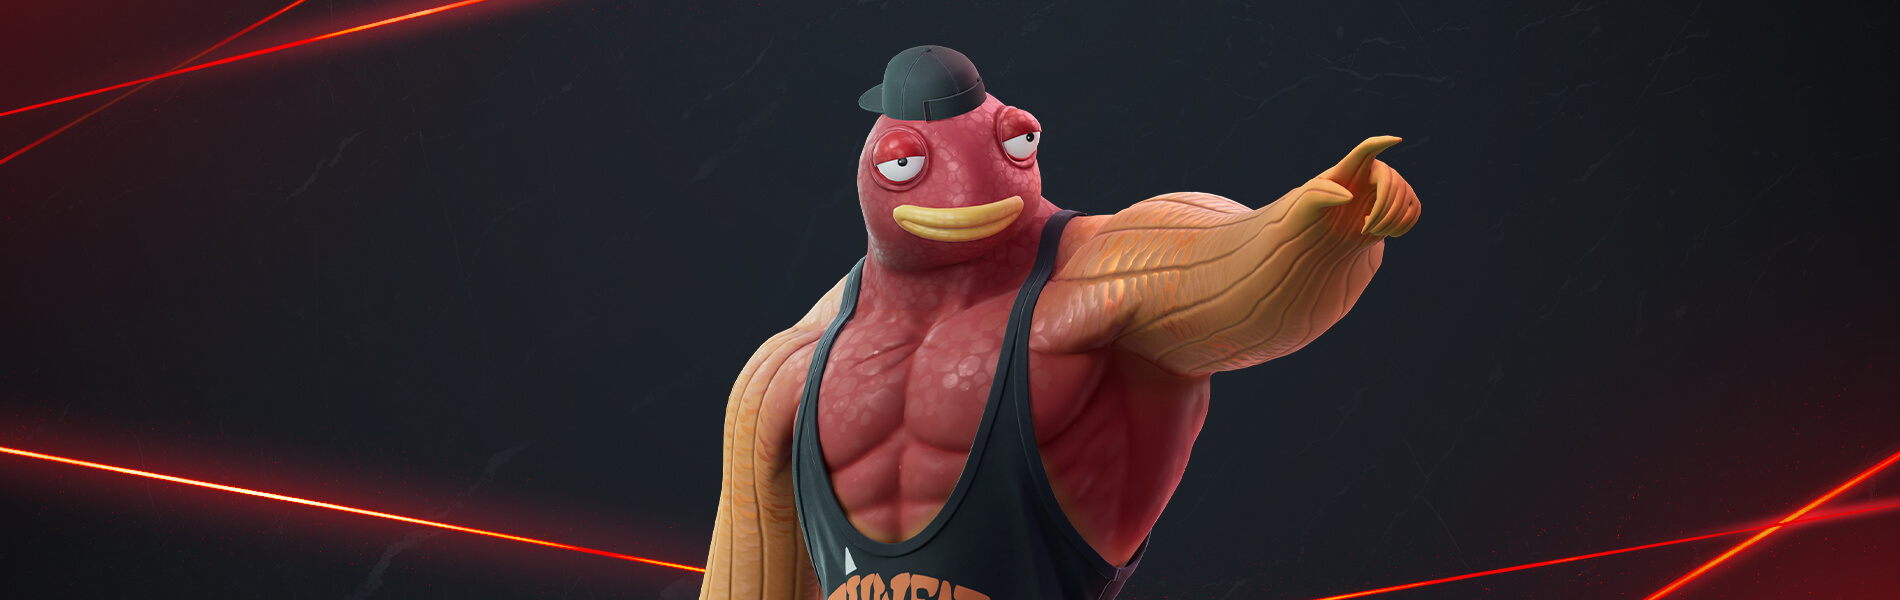 Fortnite Fish Thicc-Outfit